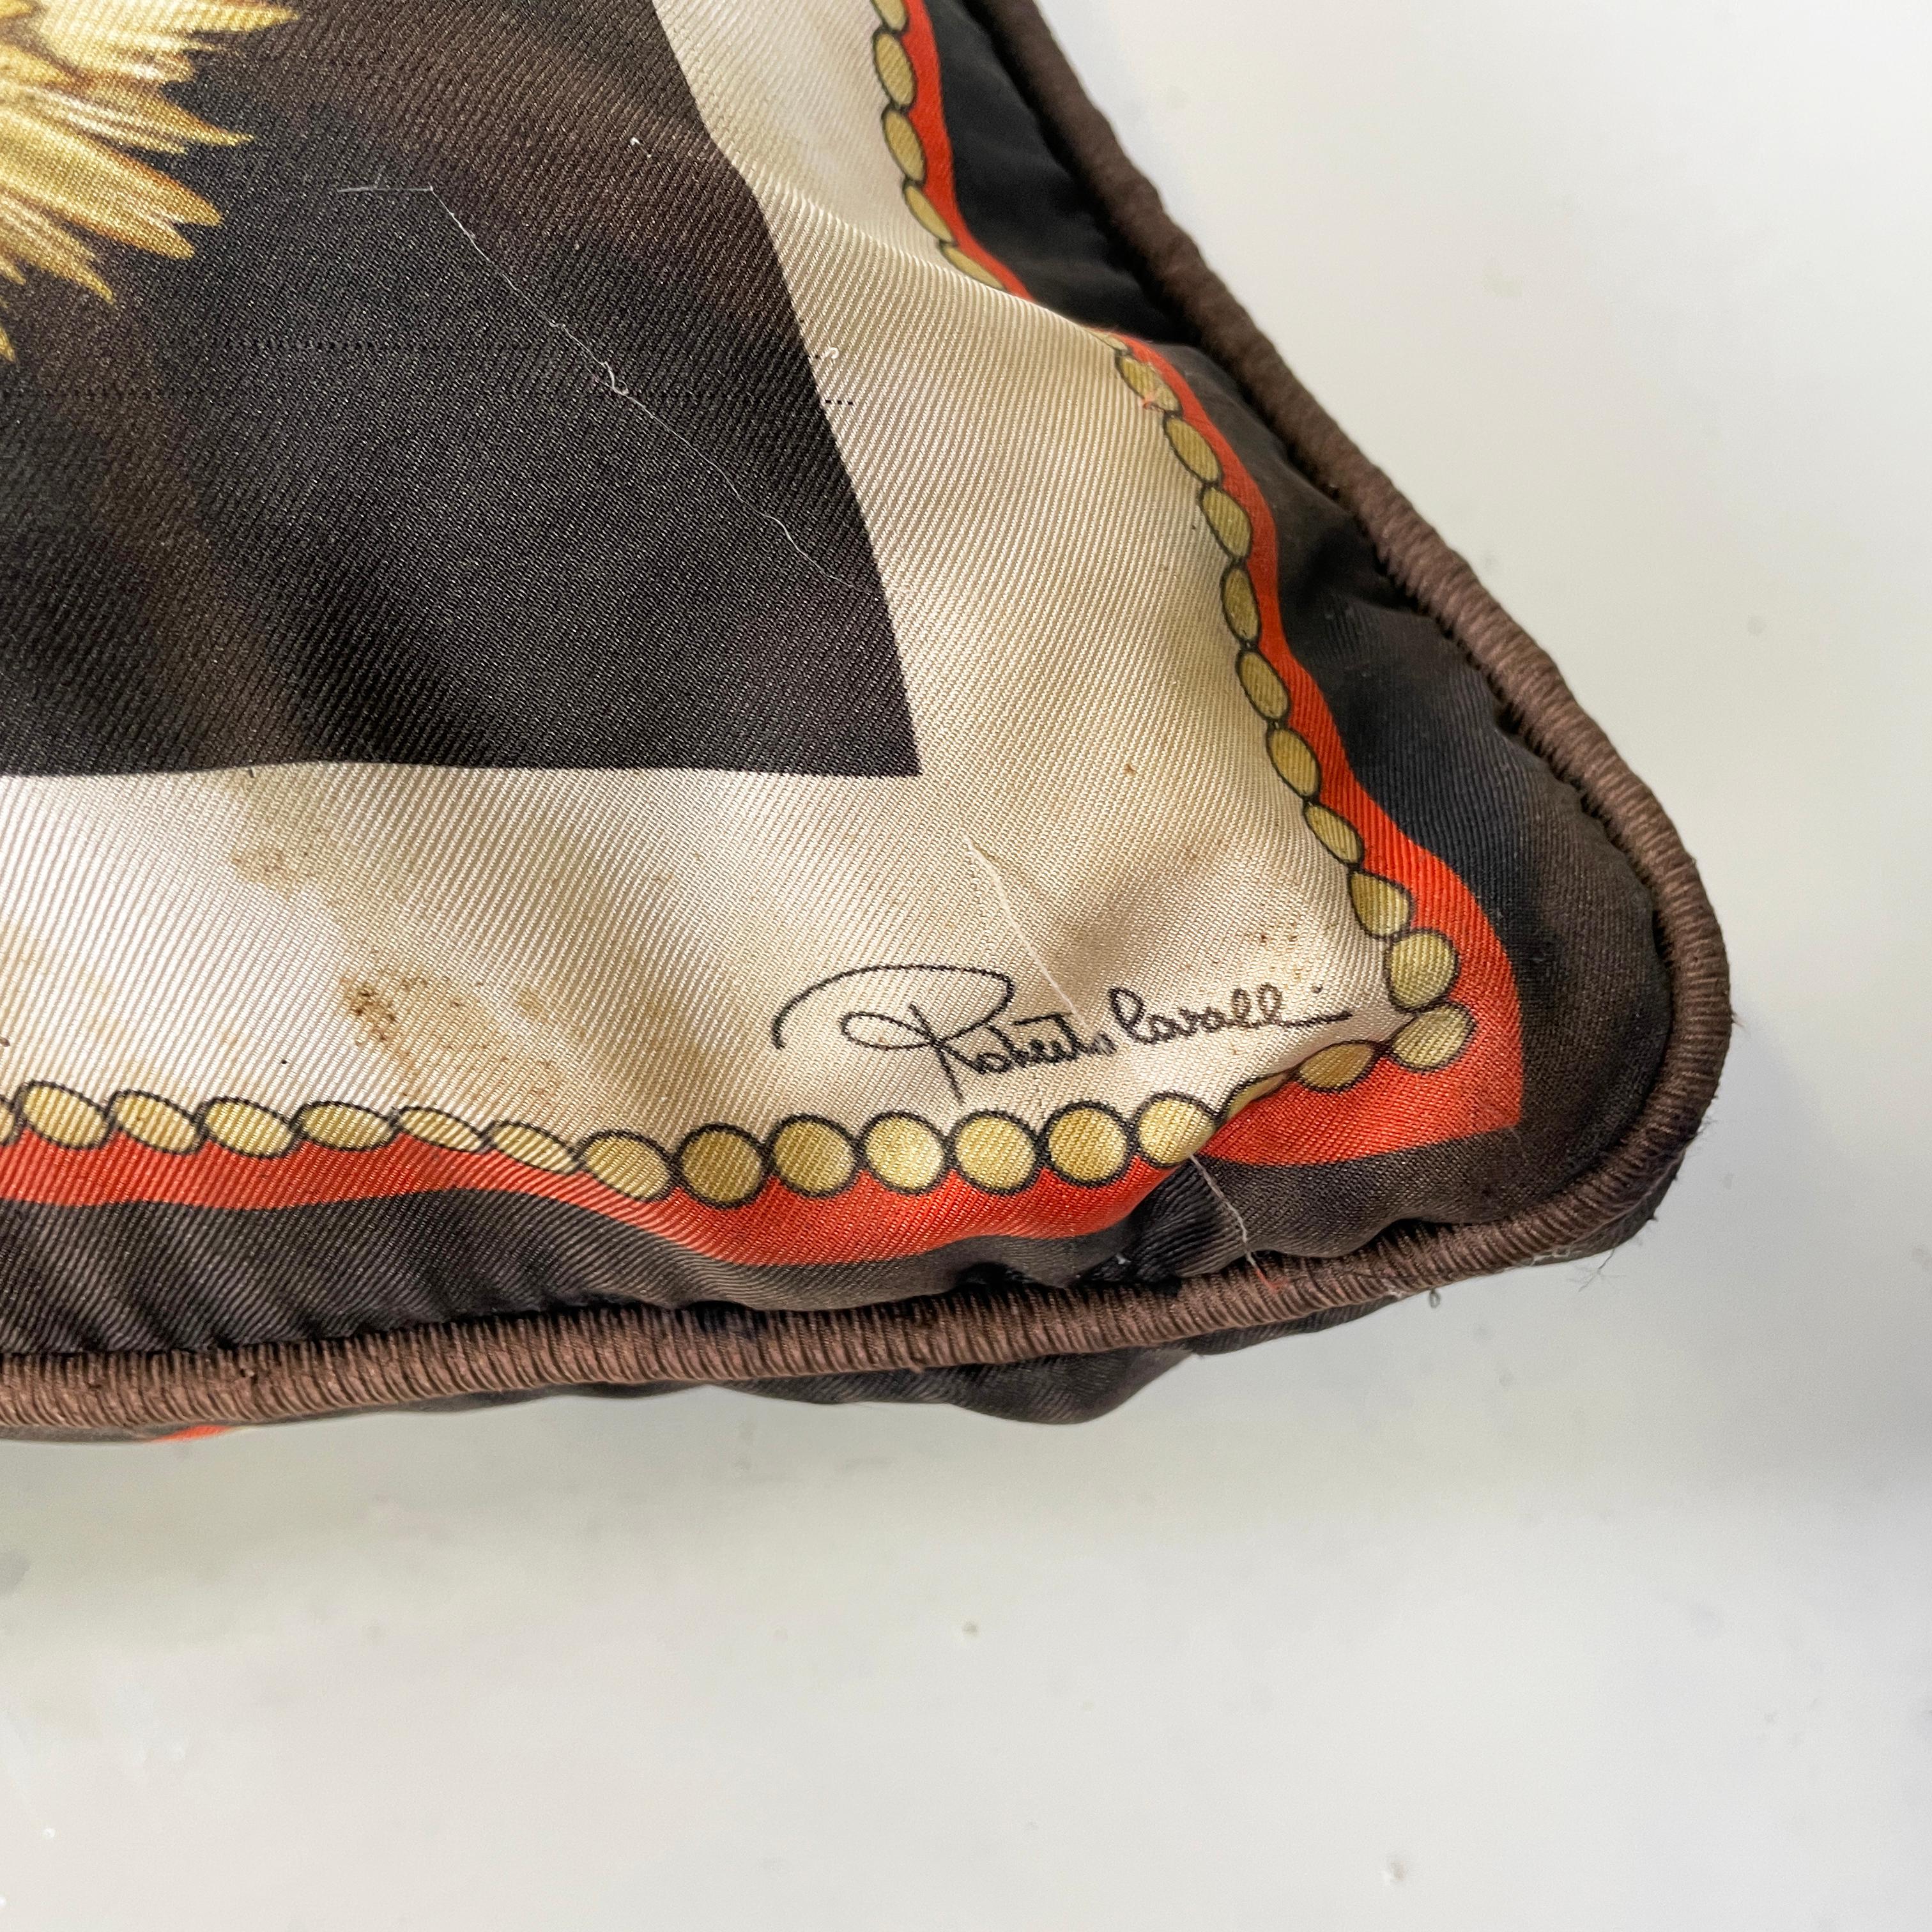 Italian post modern Fabric cushion with colored pattern by Roberto Cavalli 2000s For Sale 10